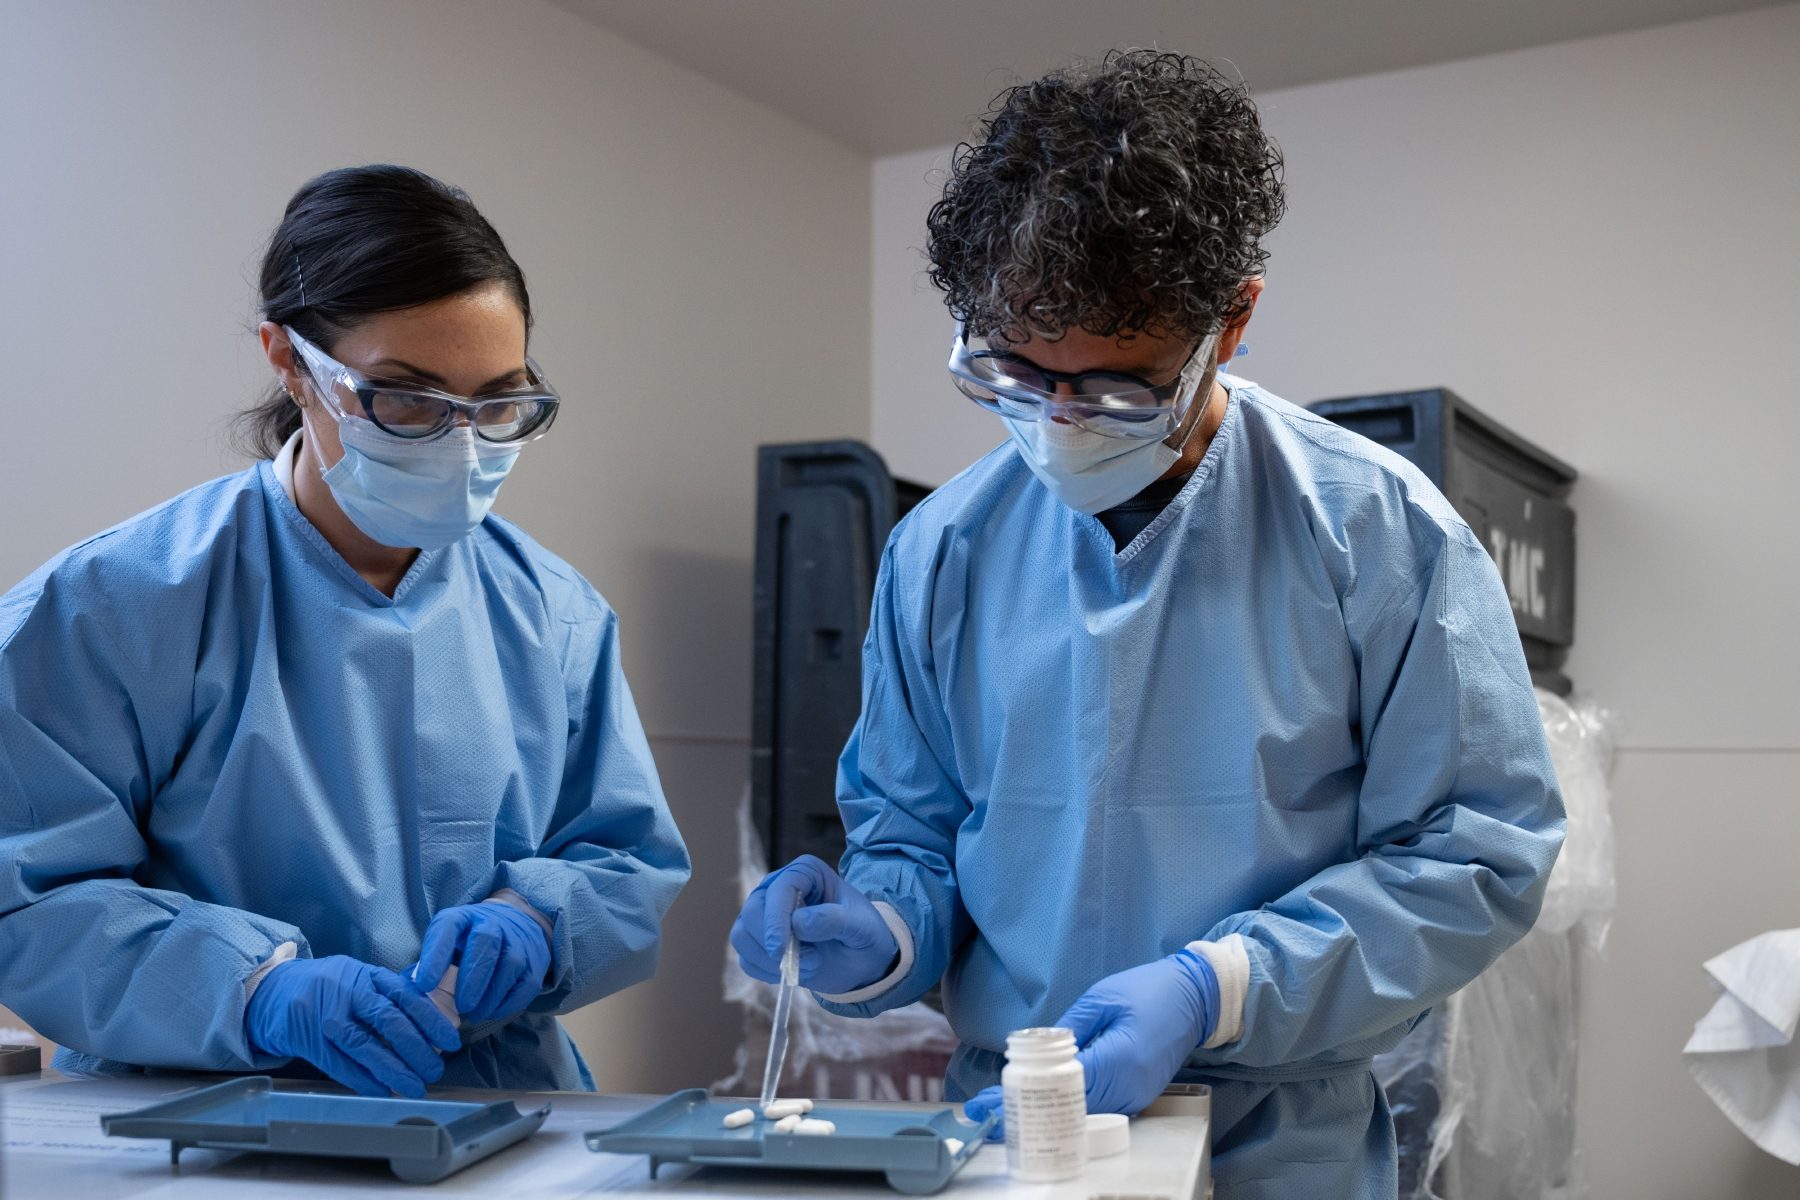 Investigational Cancer Therapy research nurses Rebecca Lout (left) and Ruben Ramires Da Silva (right) work together in the clinic.